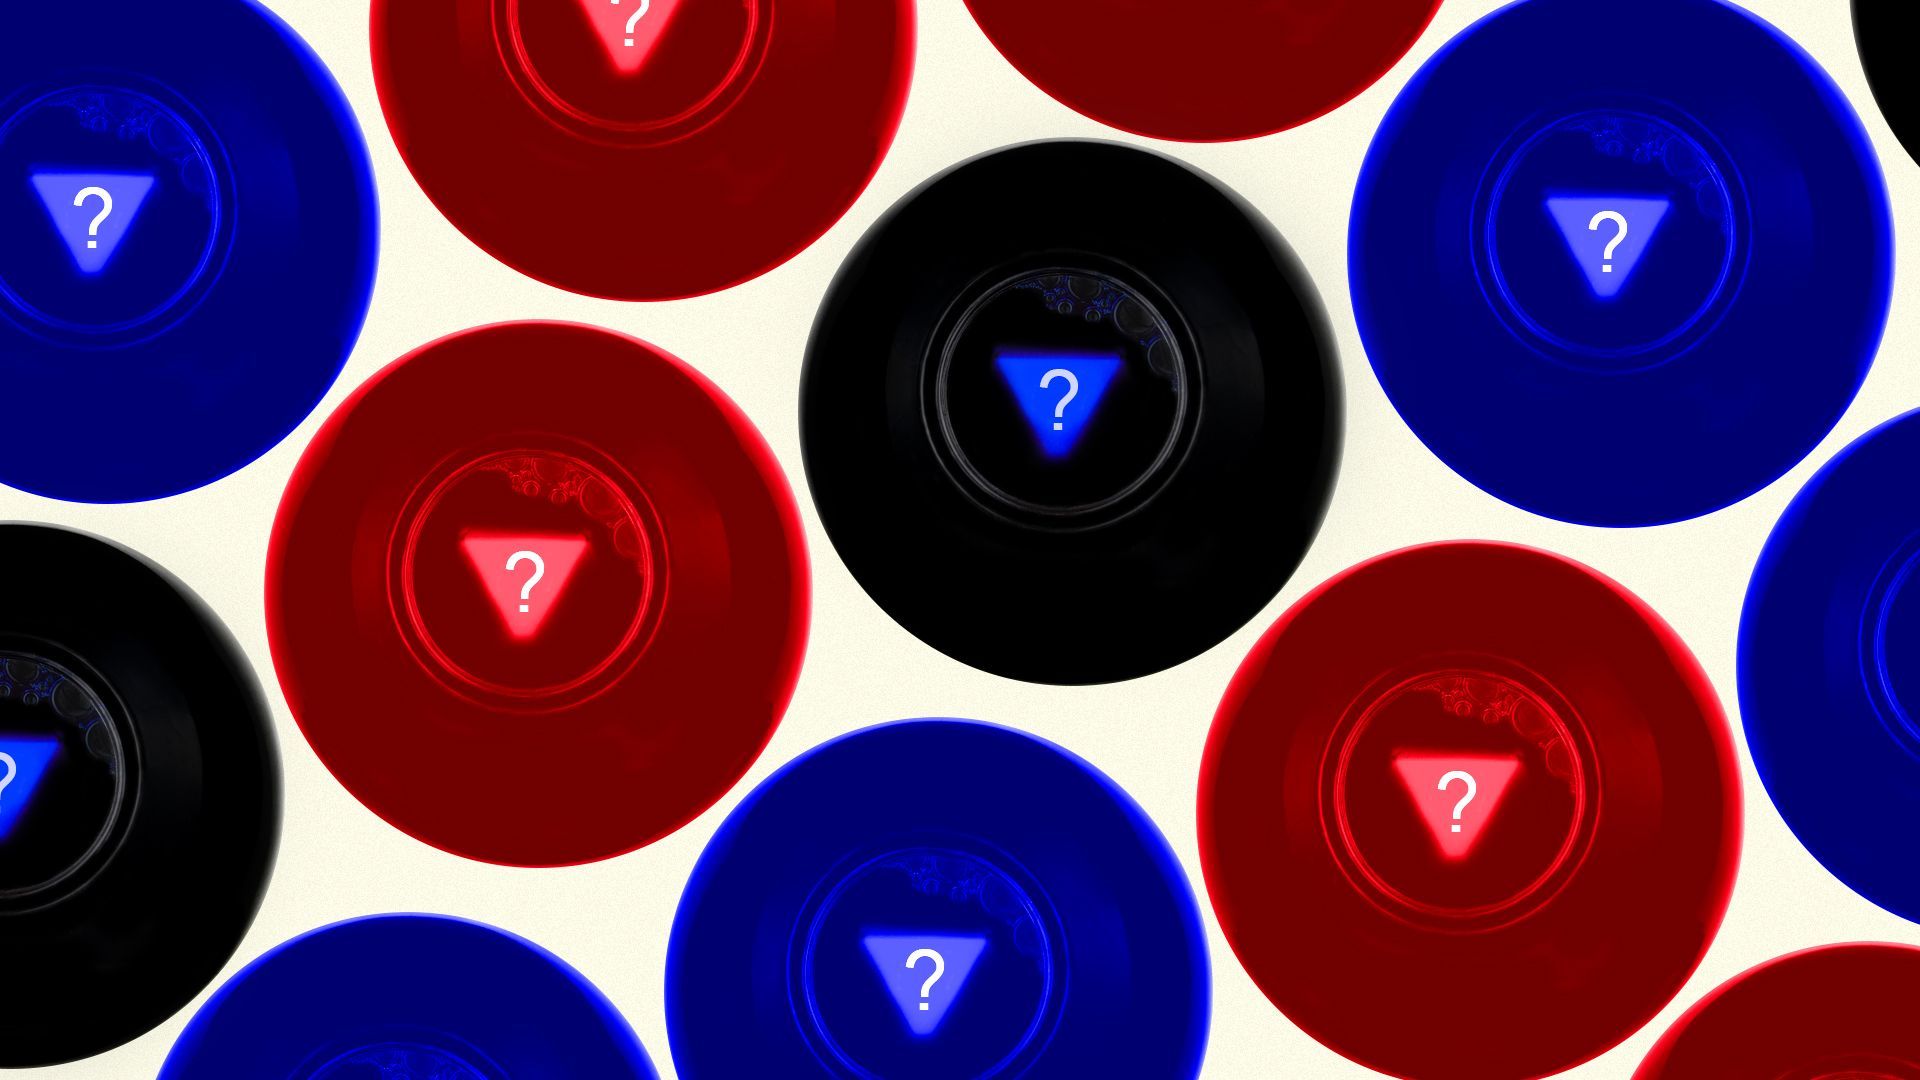 Illustration of magic eight balls with some colored in red or blue.